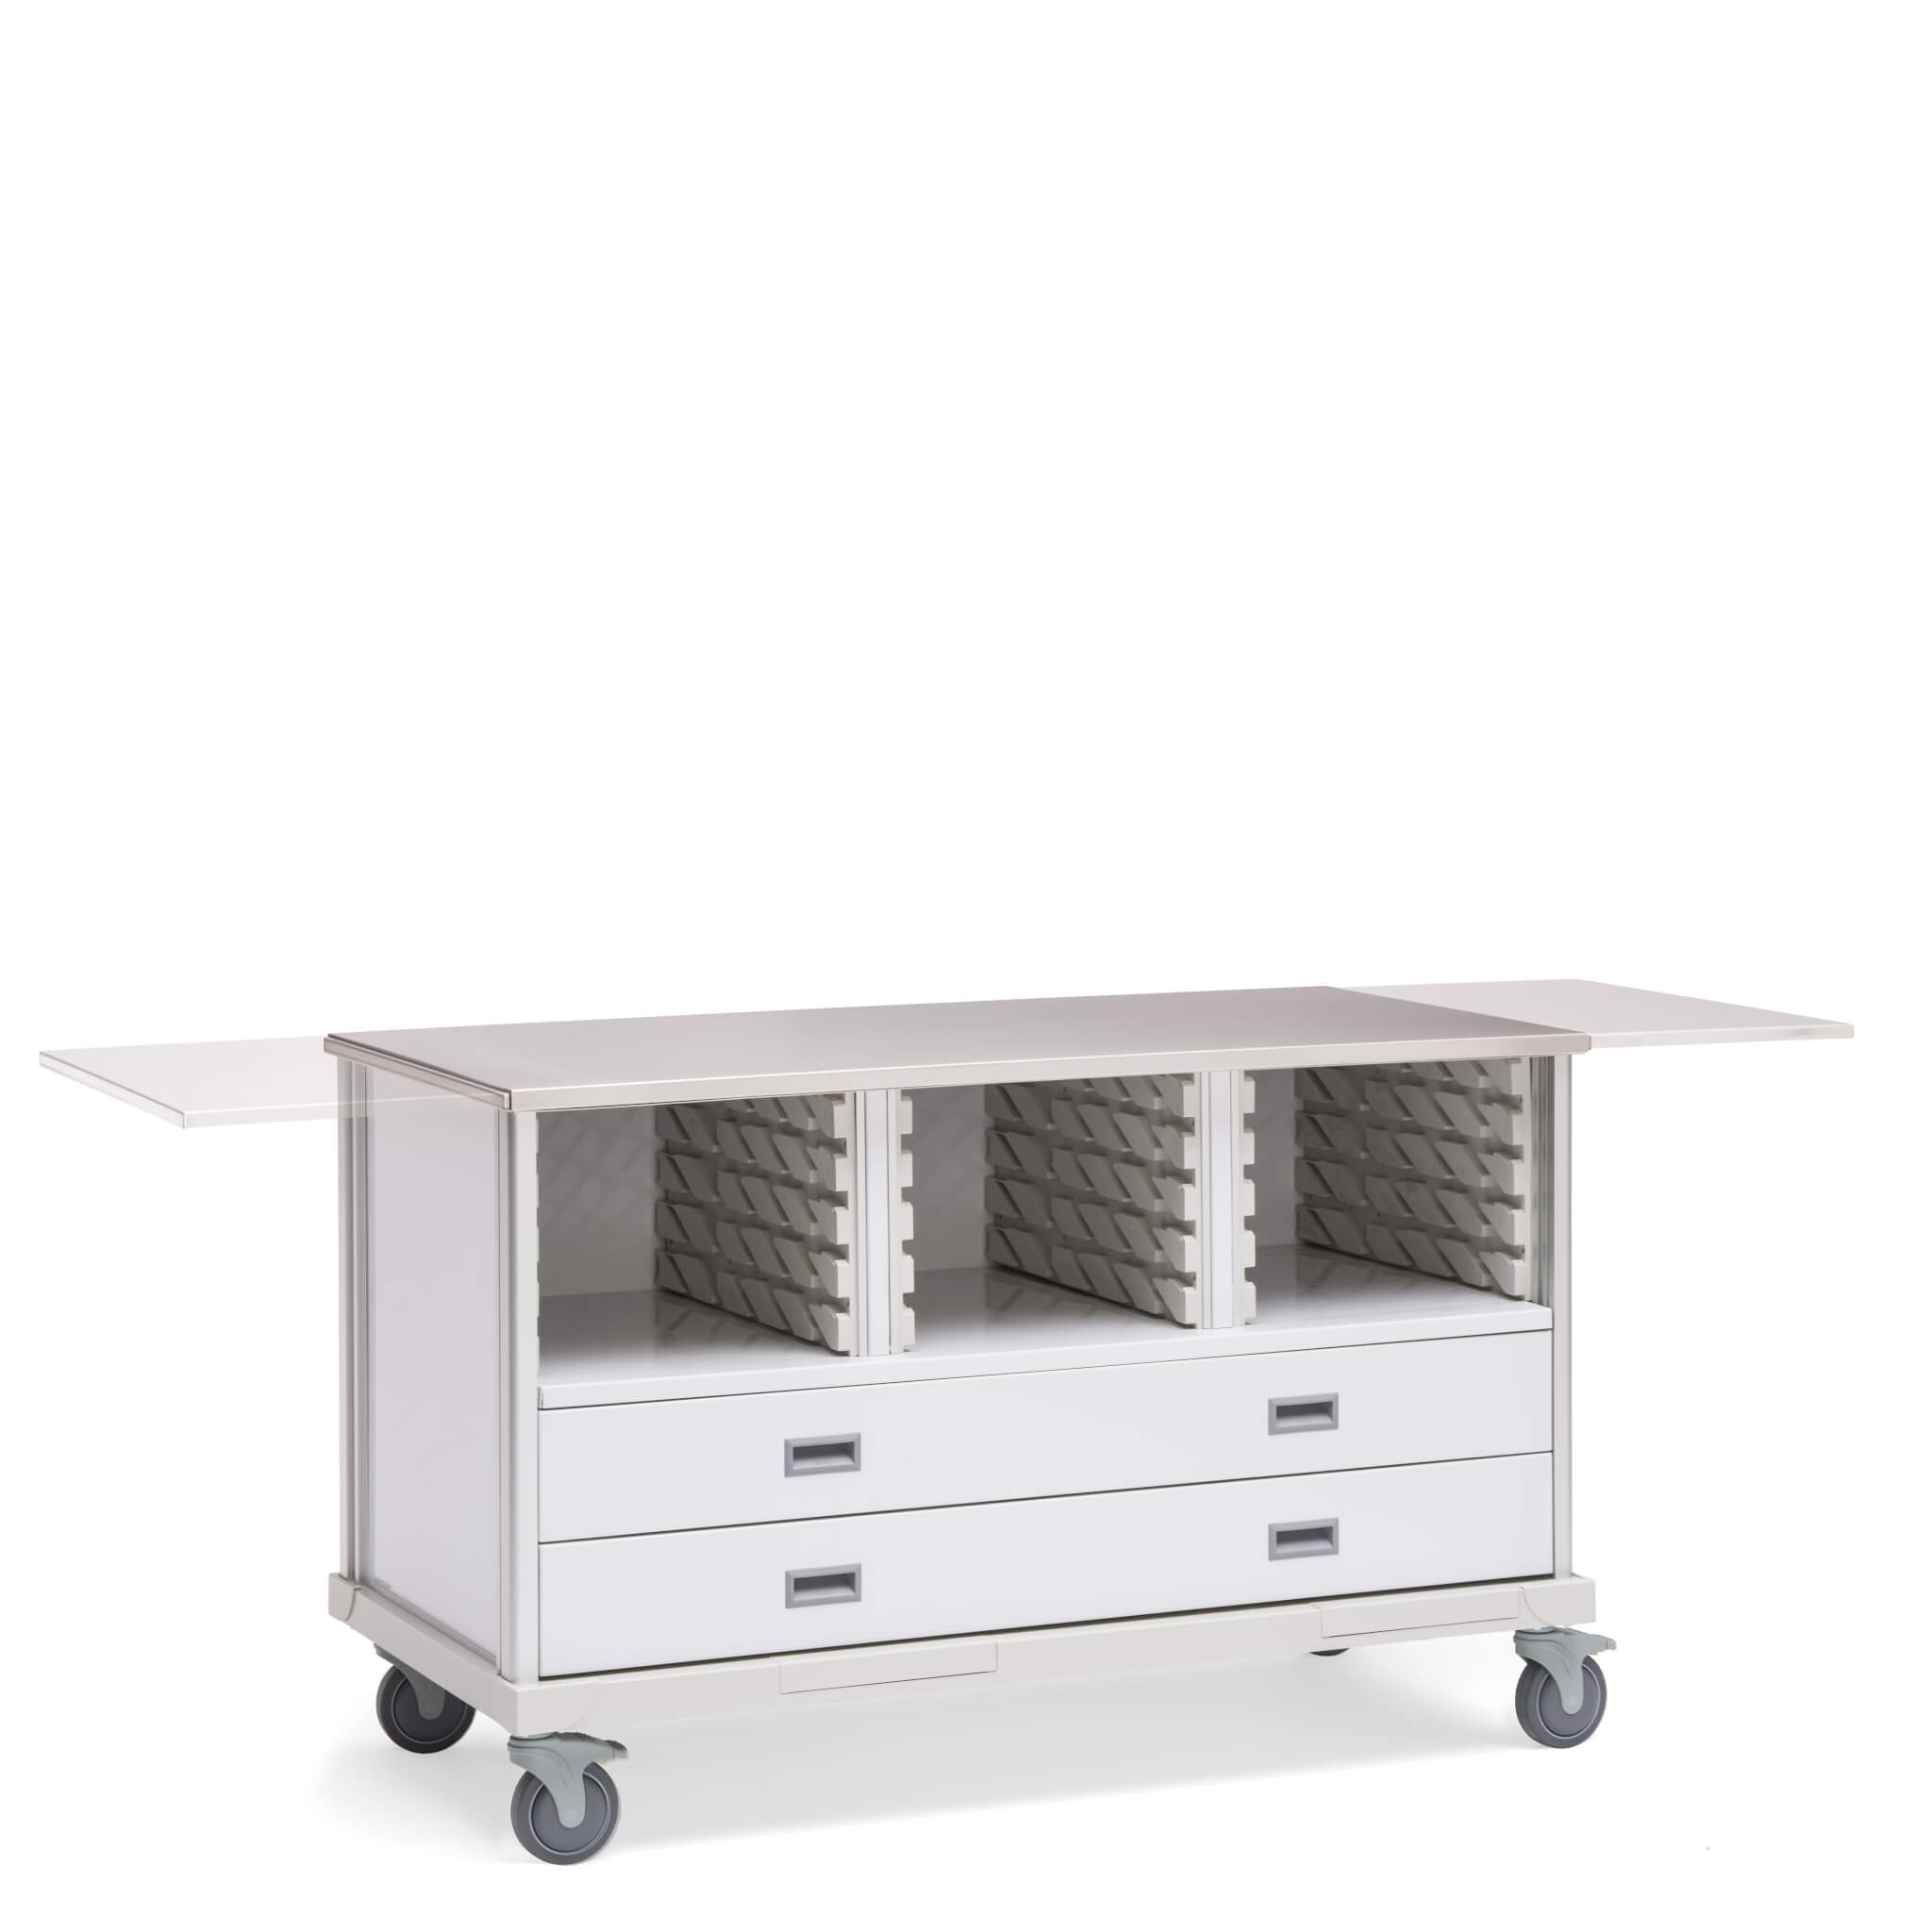 ECP Cart with Drawers and 2 Center Columns with shelves extended